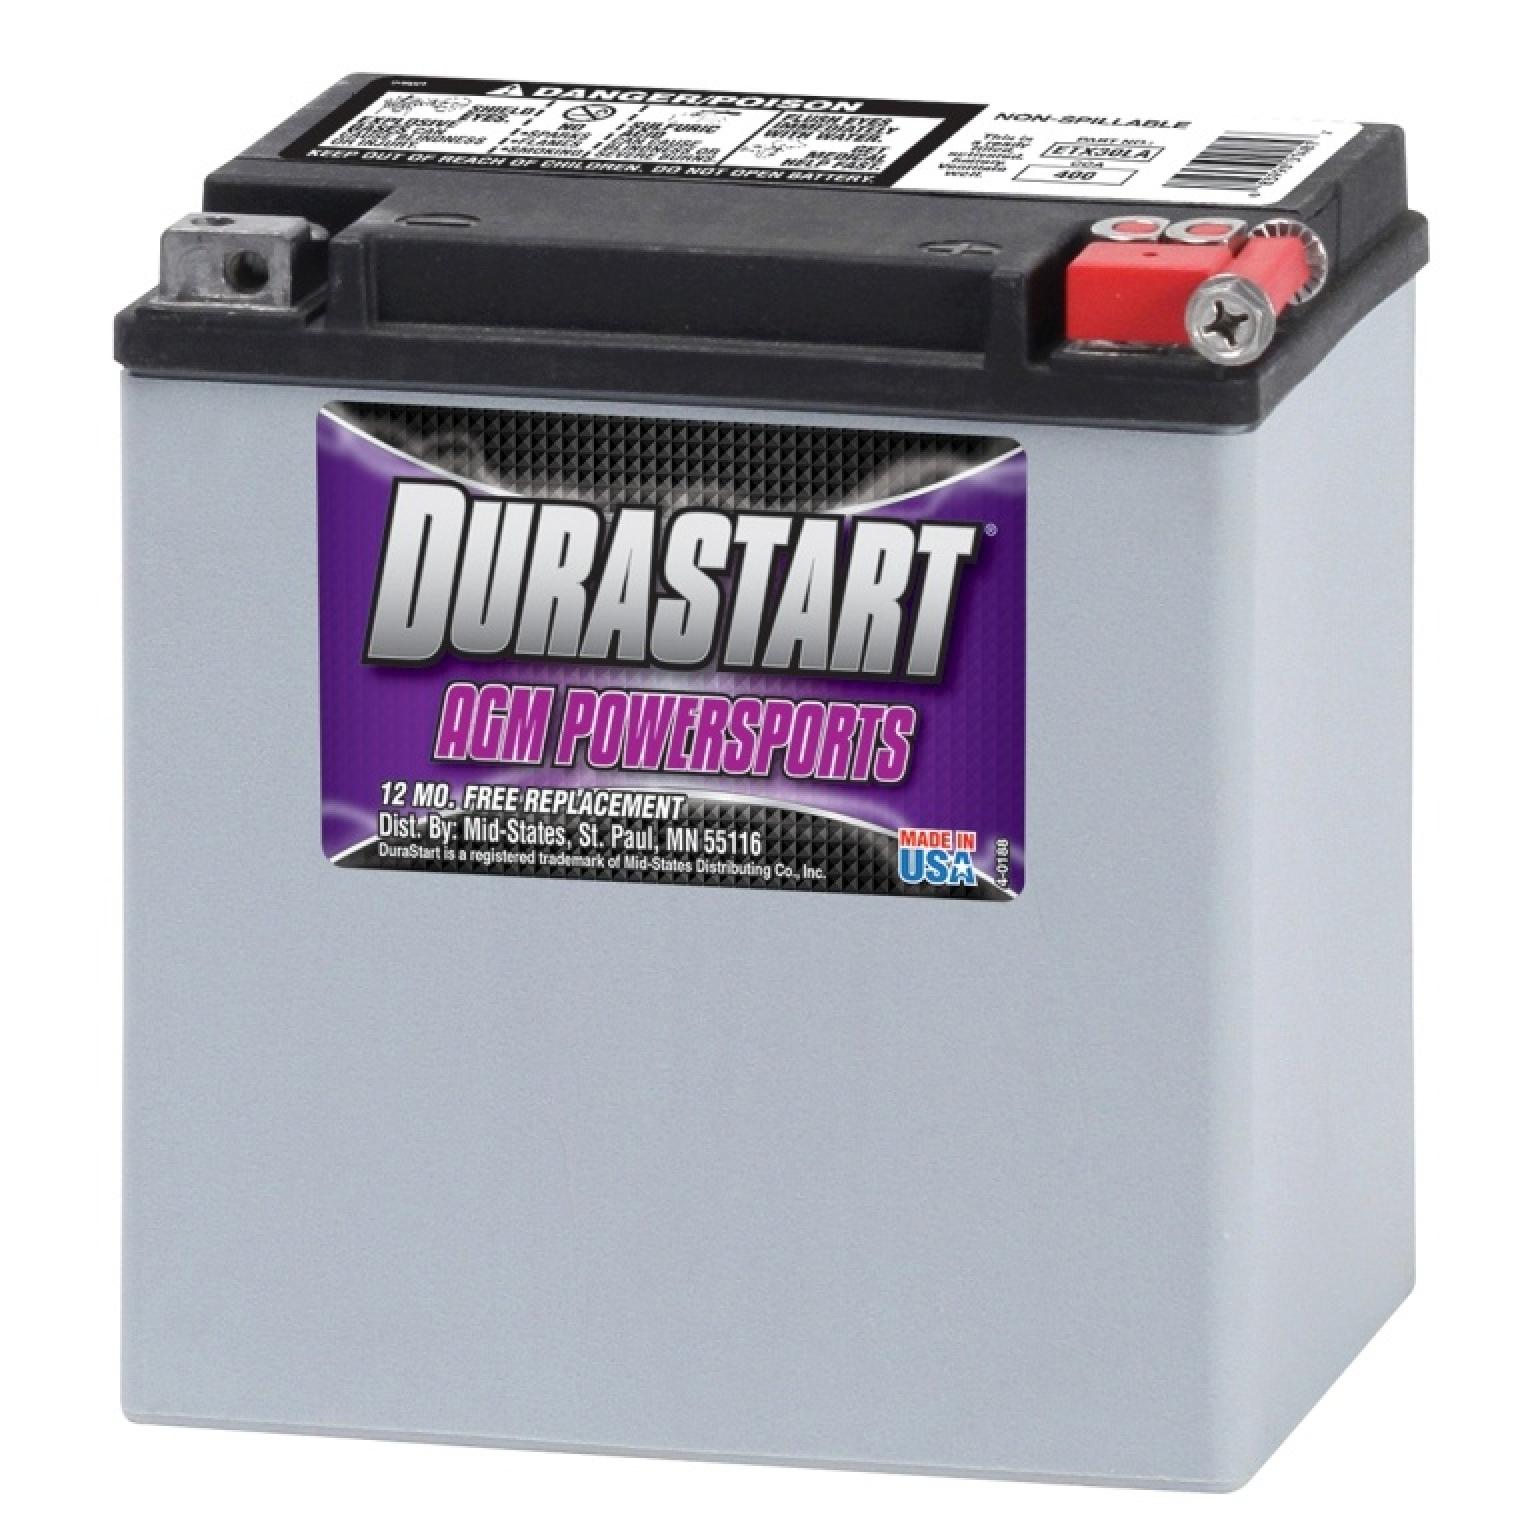 Powersports and Auto Batteries